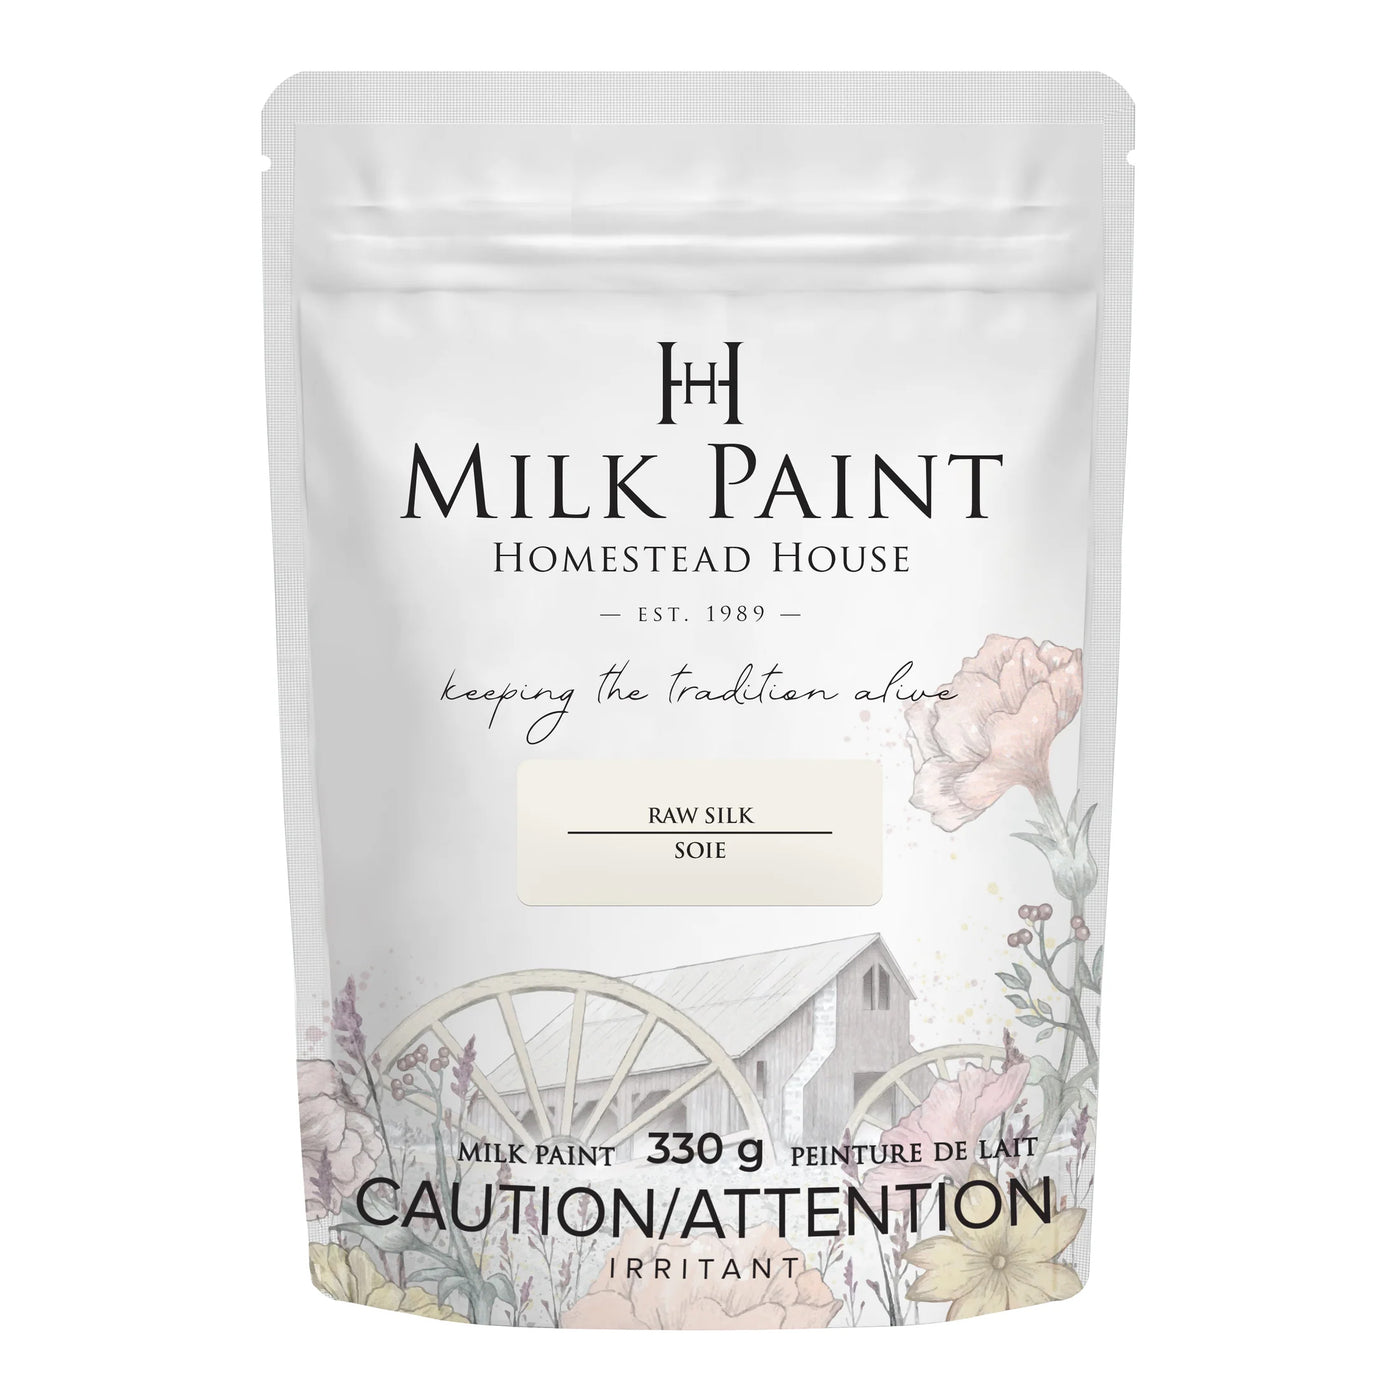 Homestead House Milk Paint - Raw Silk 330g container